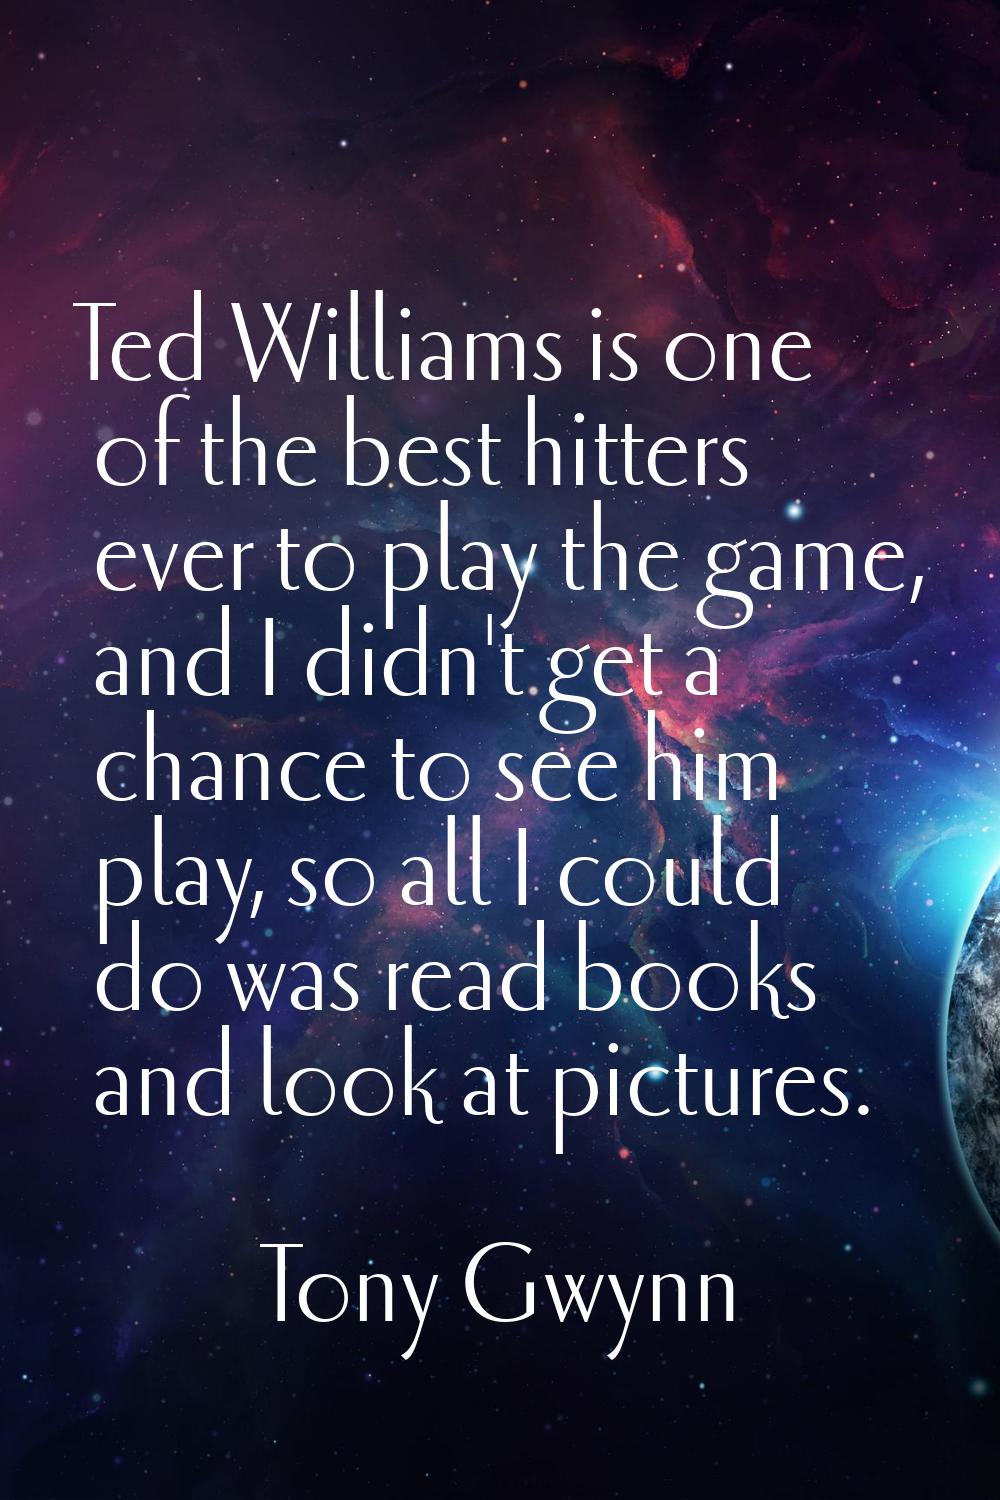 Ted Williams is one of the best hitters ever to play the game, and I didn't get a chance to see him